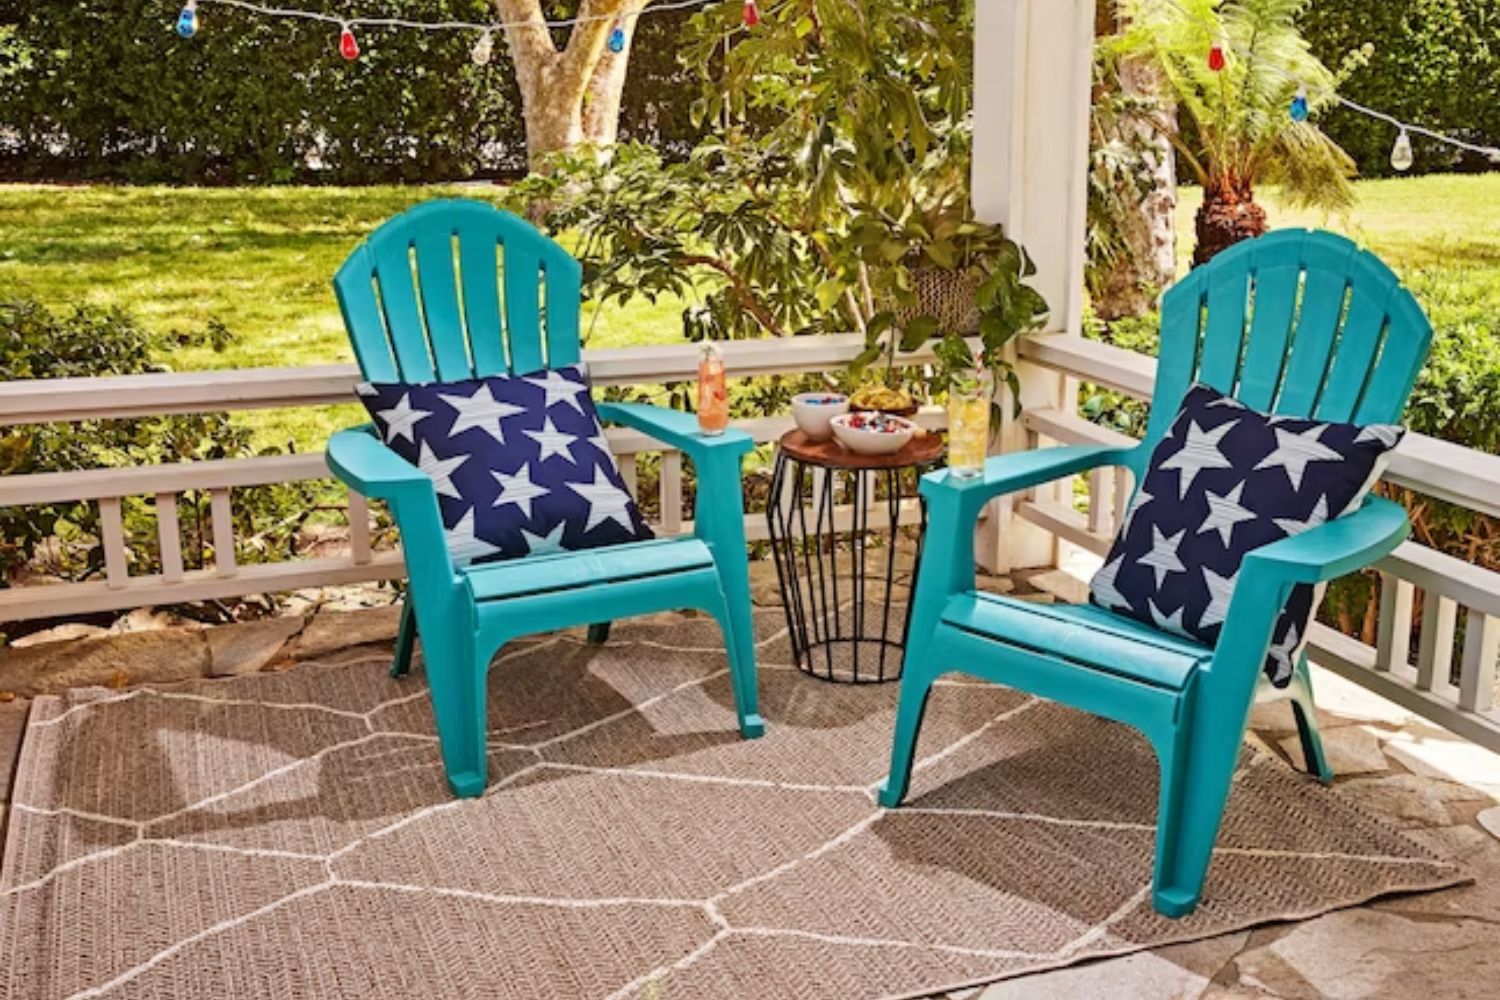 The Best Outdoor Accessories to Shop from Lowe’s Options: Adams Manufacturing RealComfort Adirondack Chair